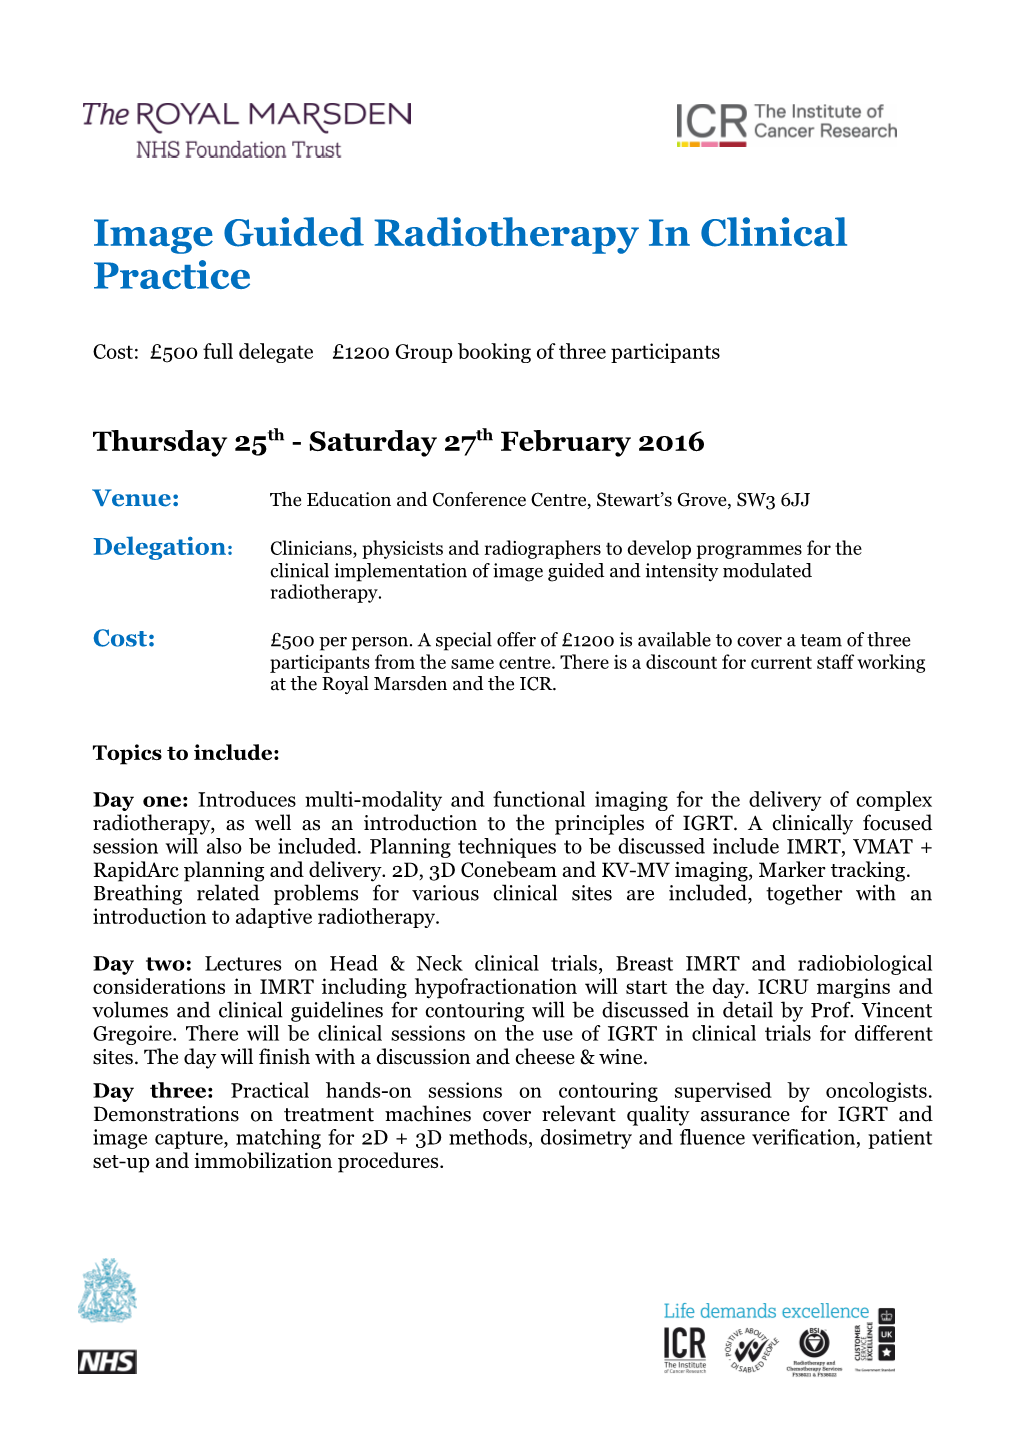 Image Guided Radiotherapy in Clinical Practice